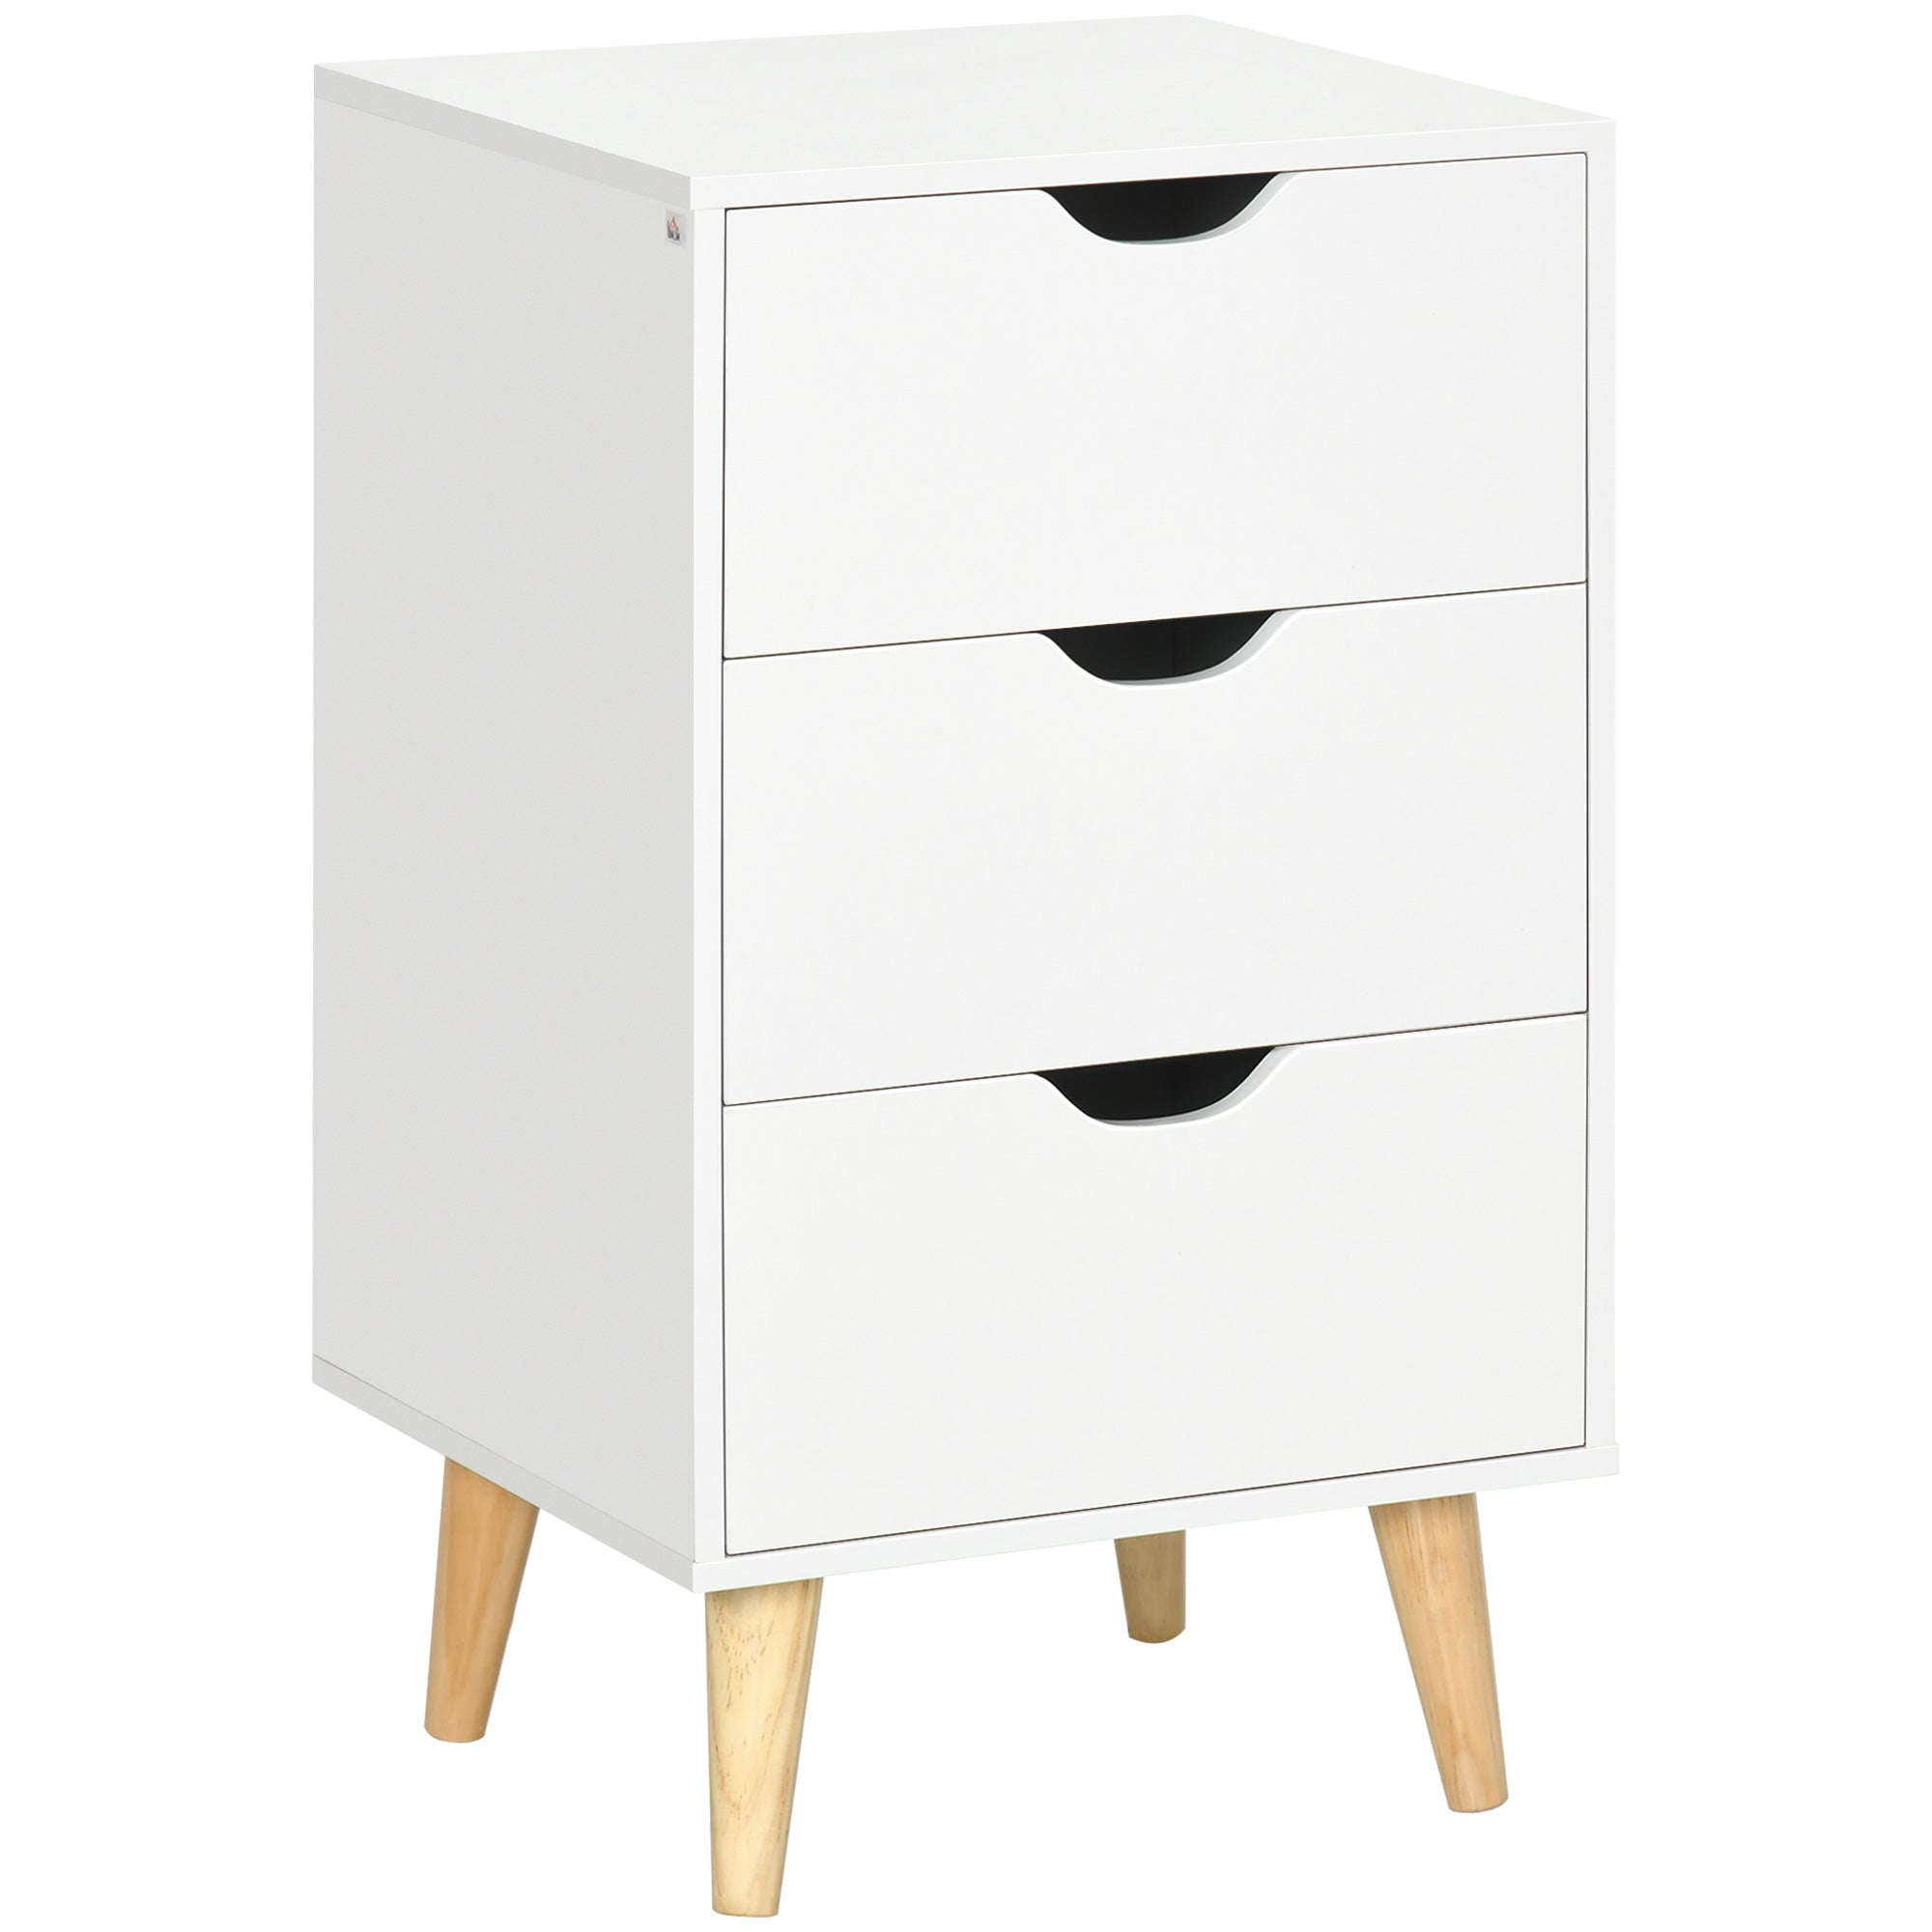 HOMCOM Bedside Table - Bedside Cabinet with 3 Drawers - Small Side Table with Wood Legs and Cut-out Handles for Bedroom - White  | TJ Hughes